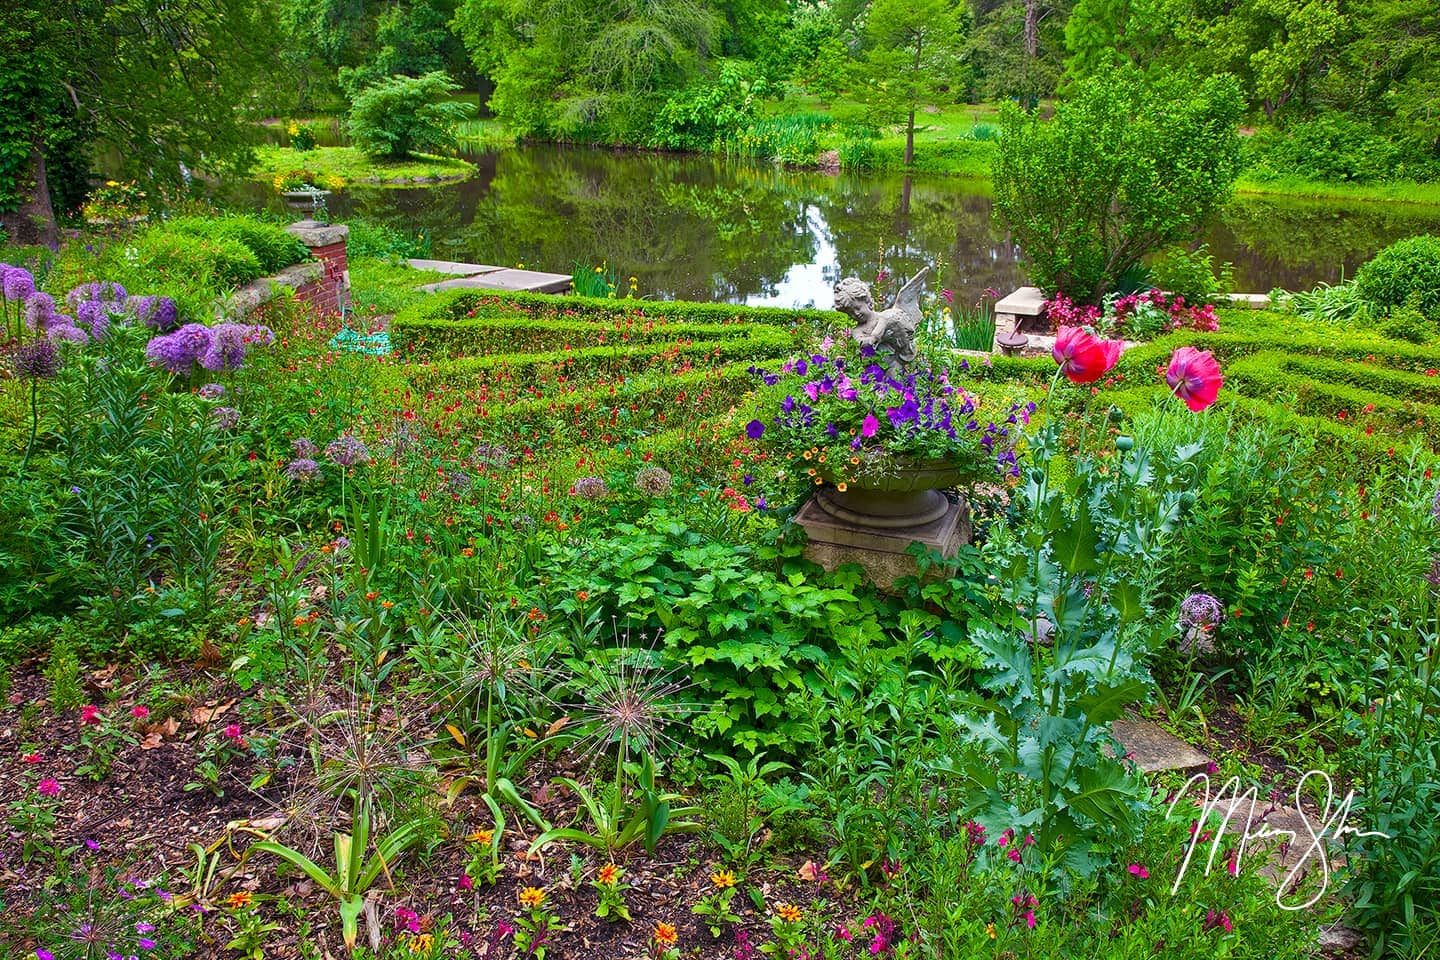 Open edition fine art print of Gardens of Bartlett Arboretum from Mickey Shannon Photography. Location: Bartlett Arboretum, Belle Plaine, Kansas